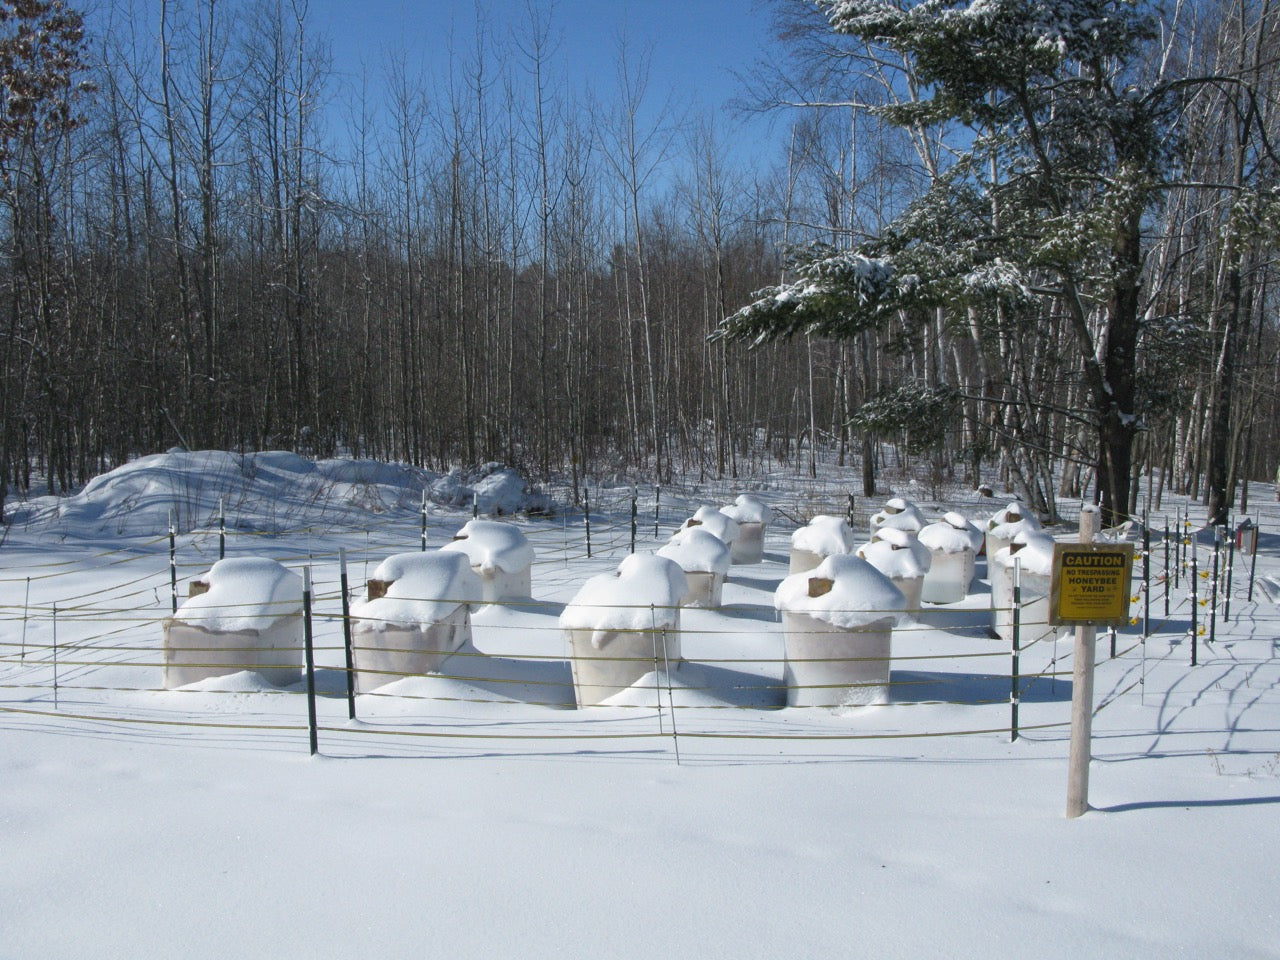 What do beekeepers do during winter?